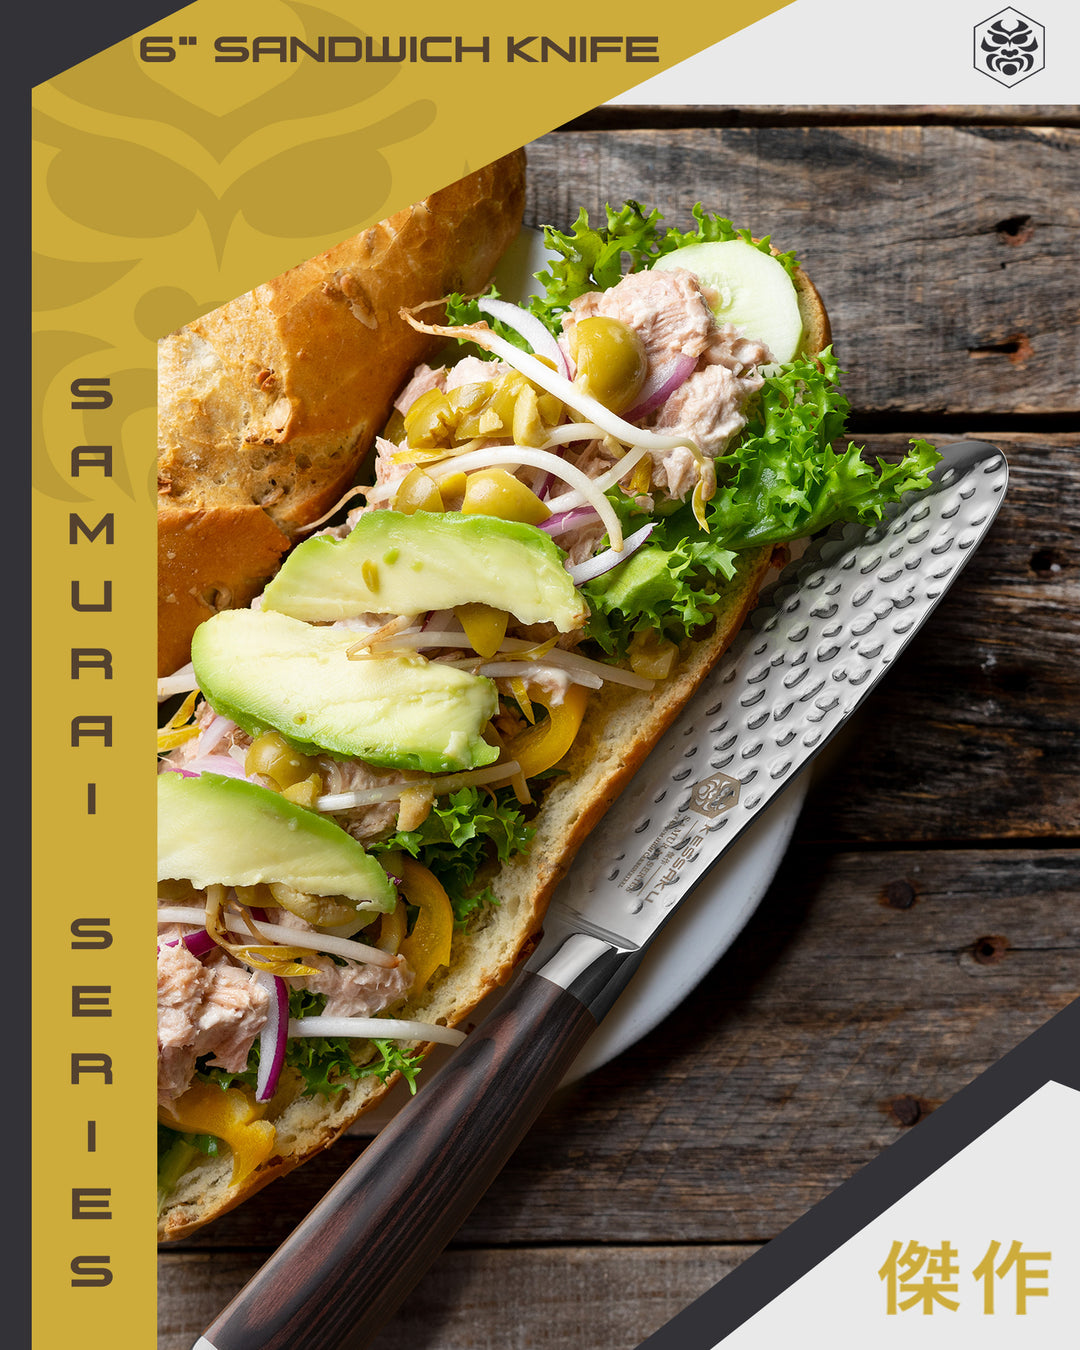 A tuna sub with slices of avocado, red onion yellow pepper and olives made with the Samurai Serrated Sandwich Knife